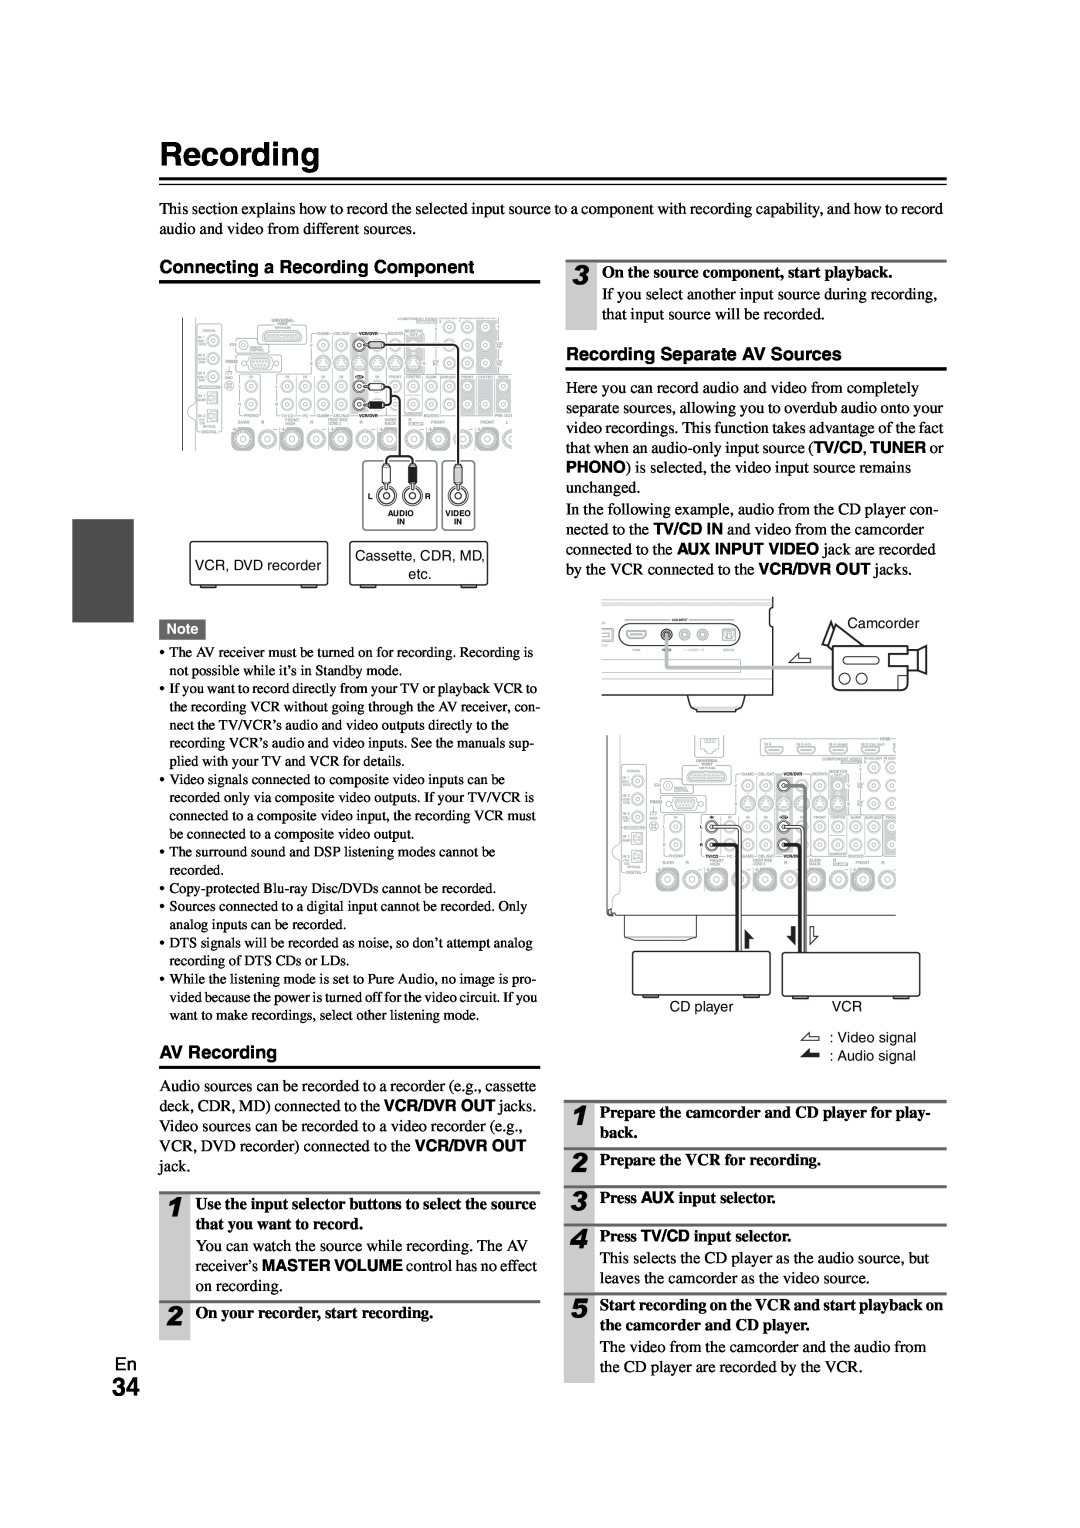 Onkyo TX-NR808 instruction manual Connecting a Recording Component, Recording Separate AV Sources, AV Recording 